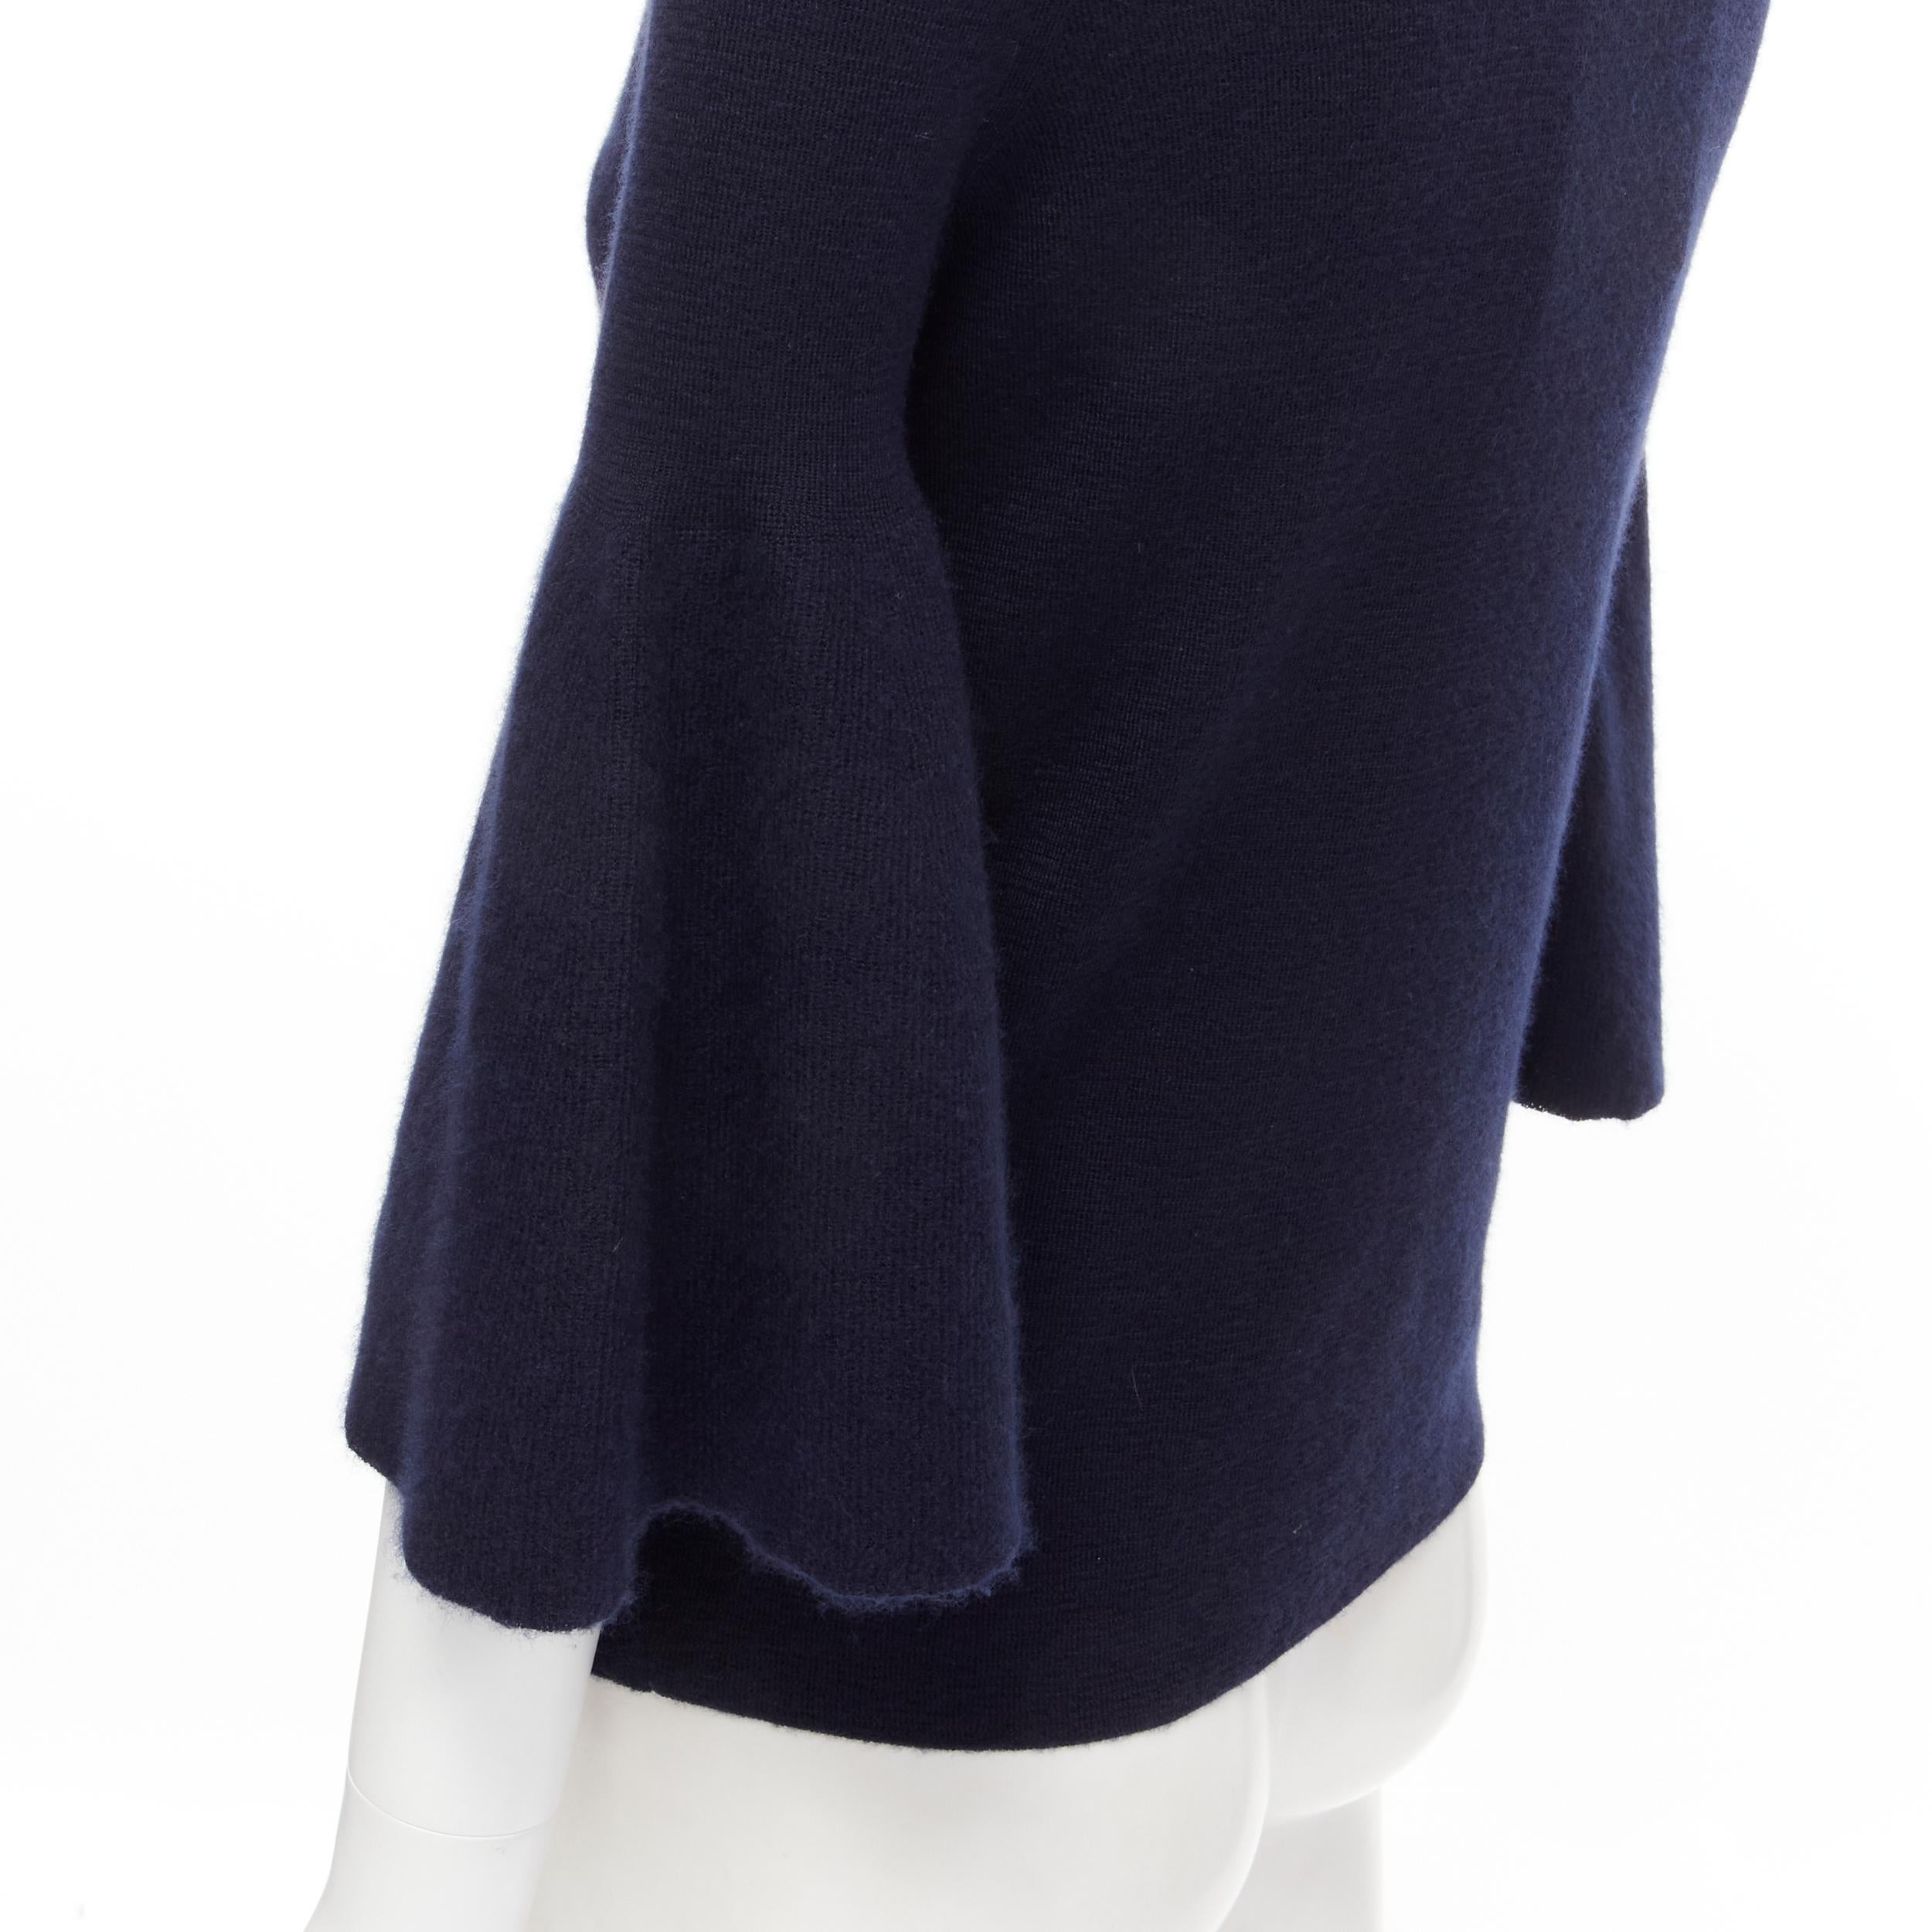 new THE ROW Adara dark navy cashmere silk bell sleeve turtleneck sweater S 
Reference: MELK/A00039 
Brand: The Row 
Material: Cashmere 
Color: Navy 
Pattern: Solid 
Made in: Italy 

CONDITION: 
Condition: New with tags. 

SIZING: 
Designer Size: